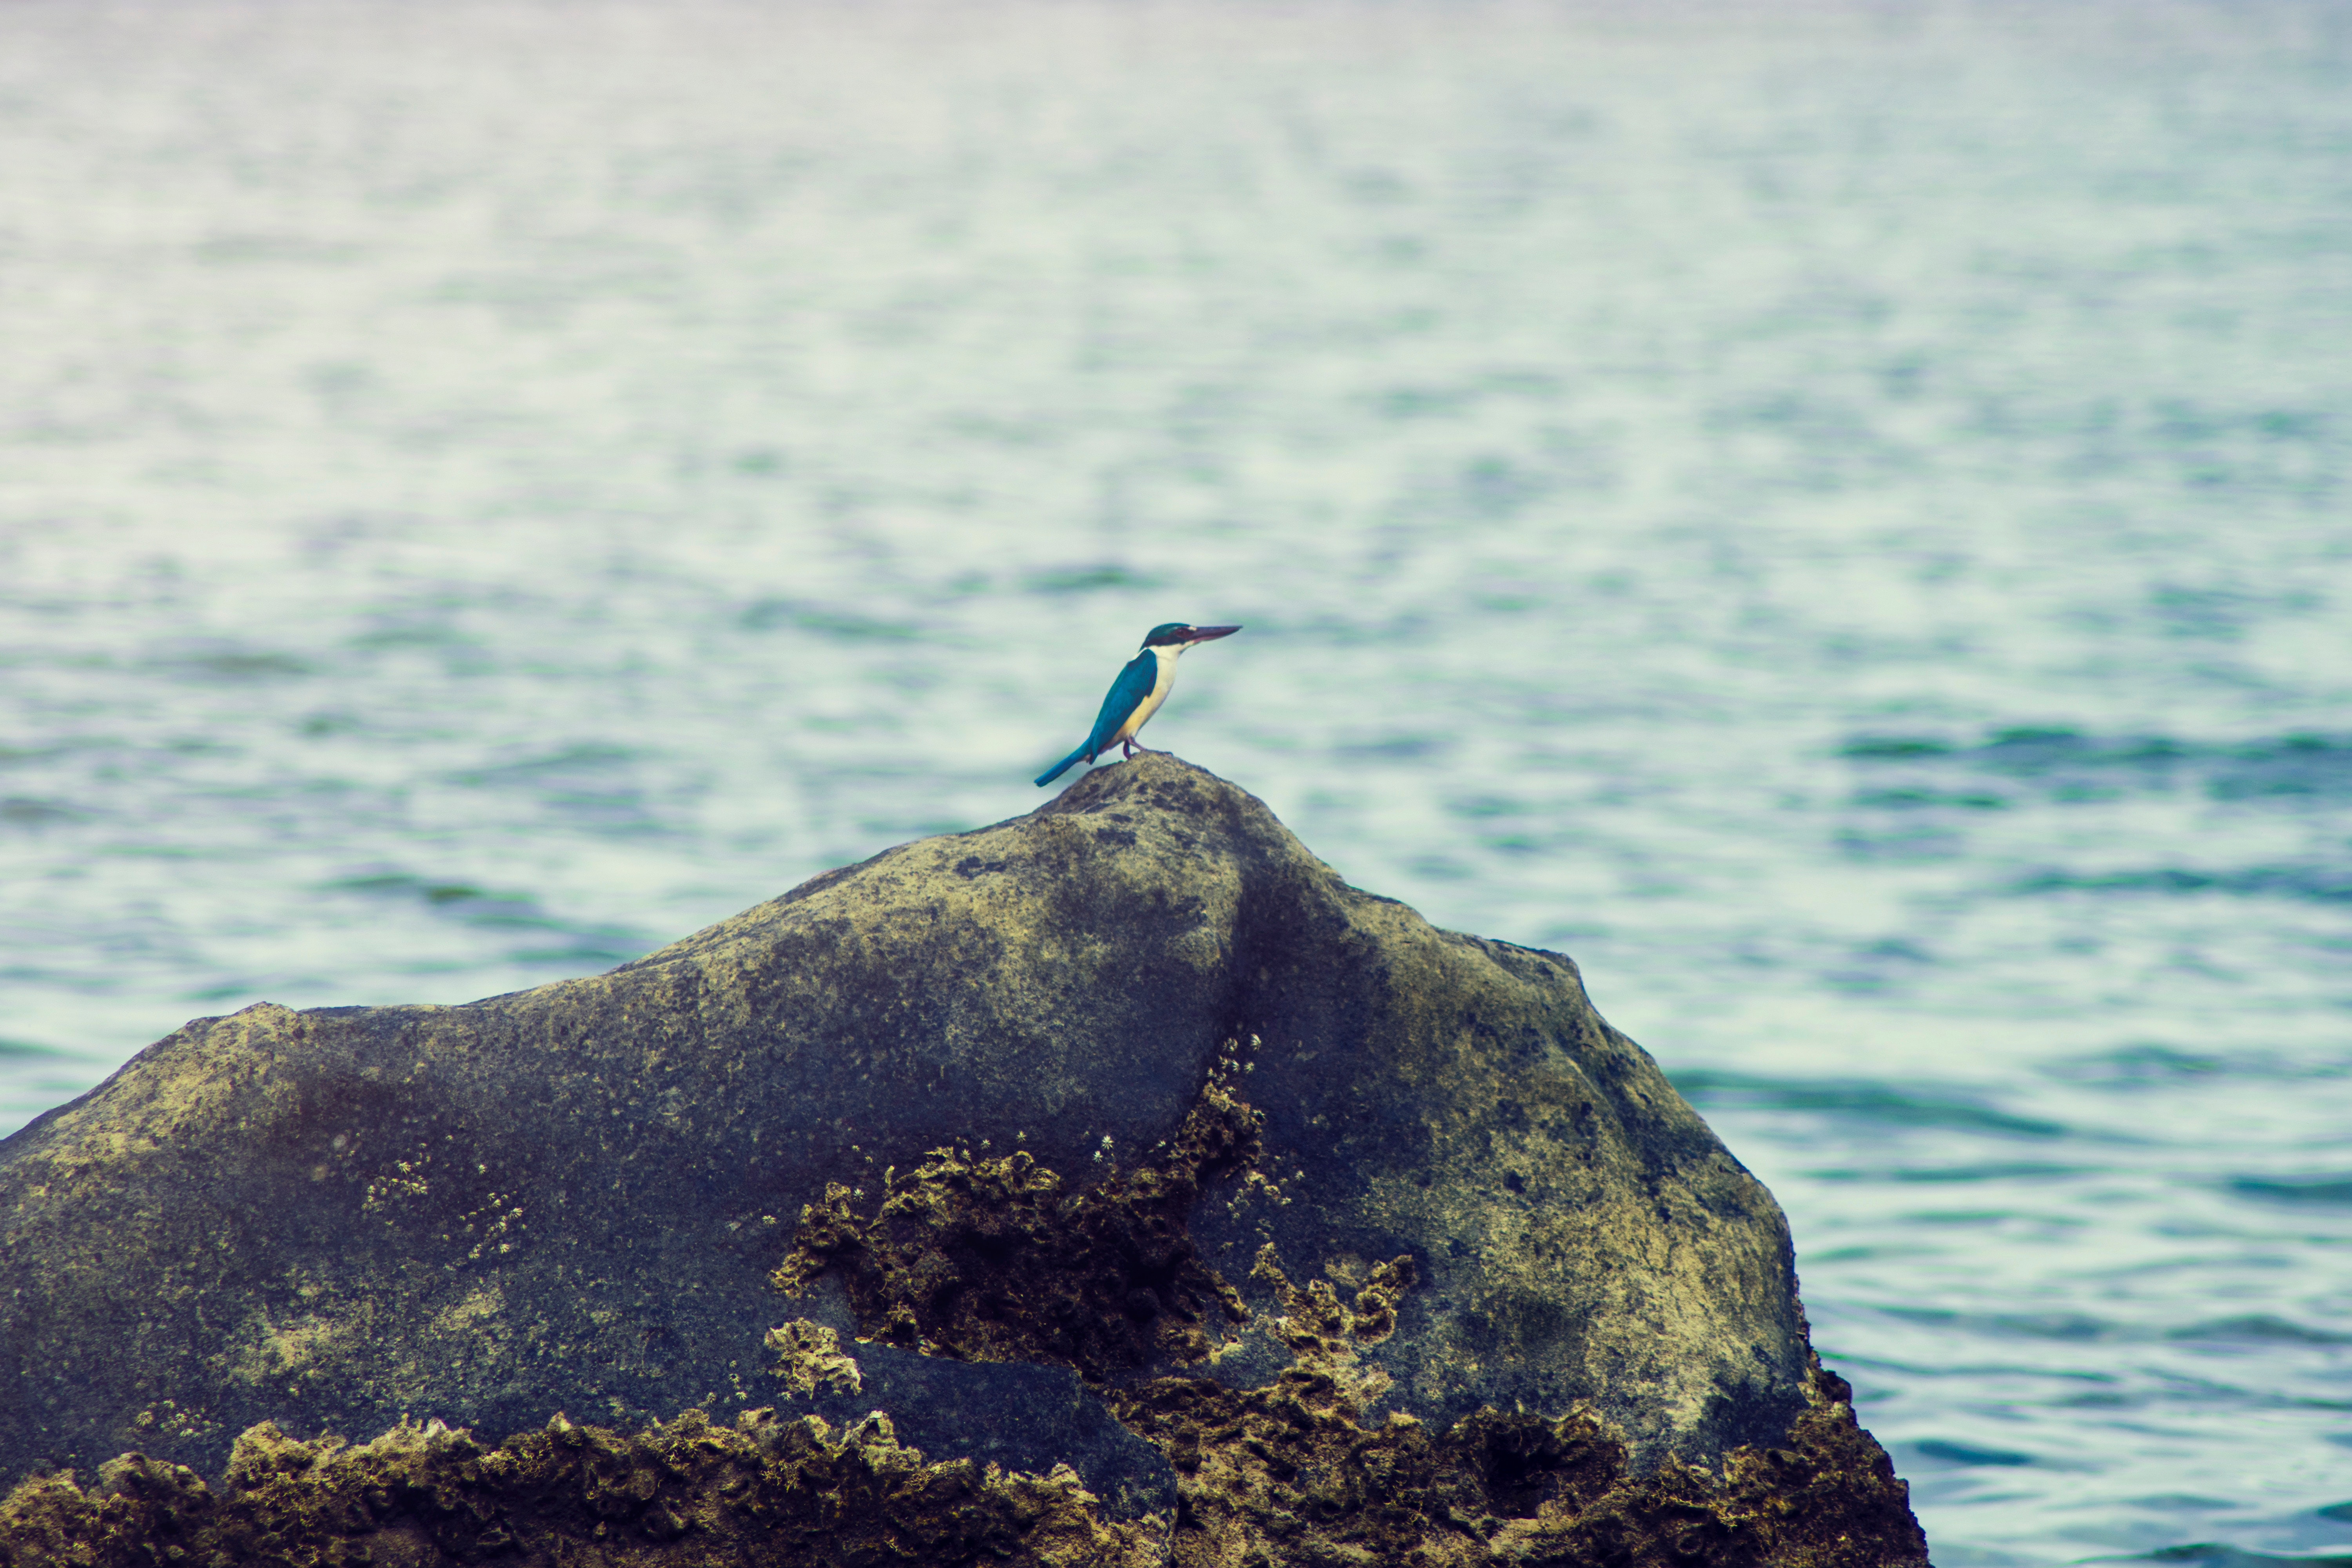 King fisher on the rock near body of water photo